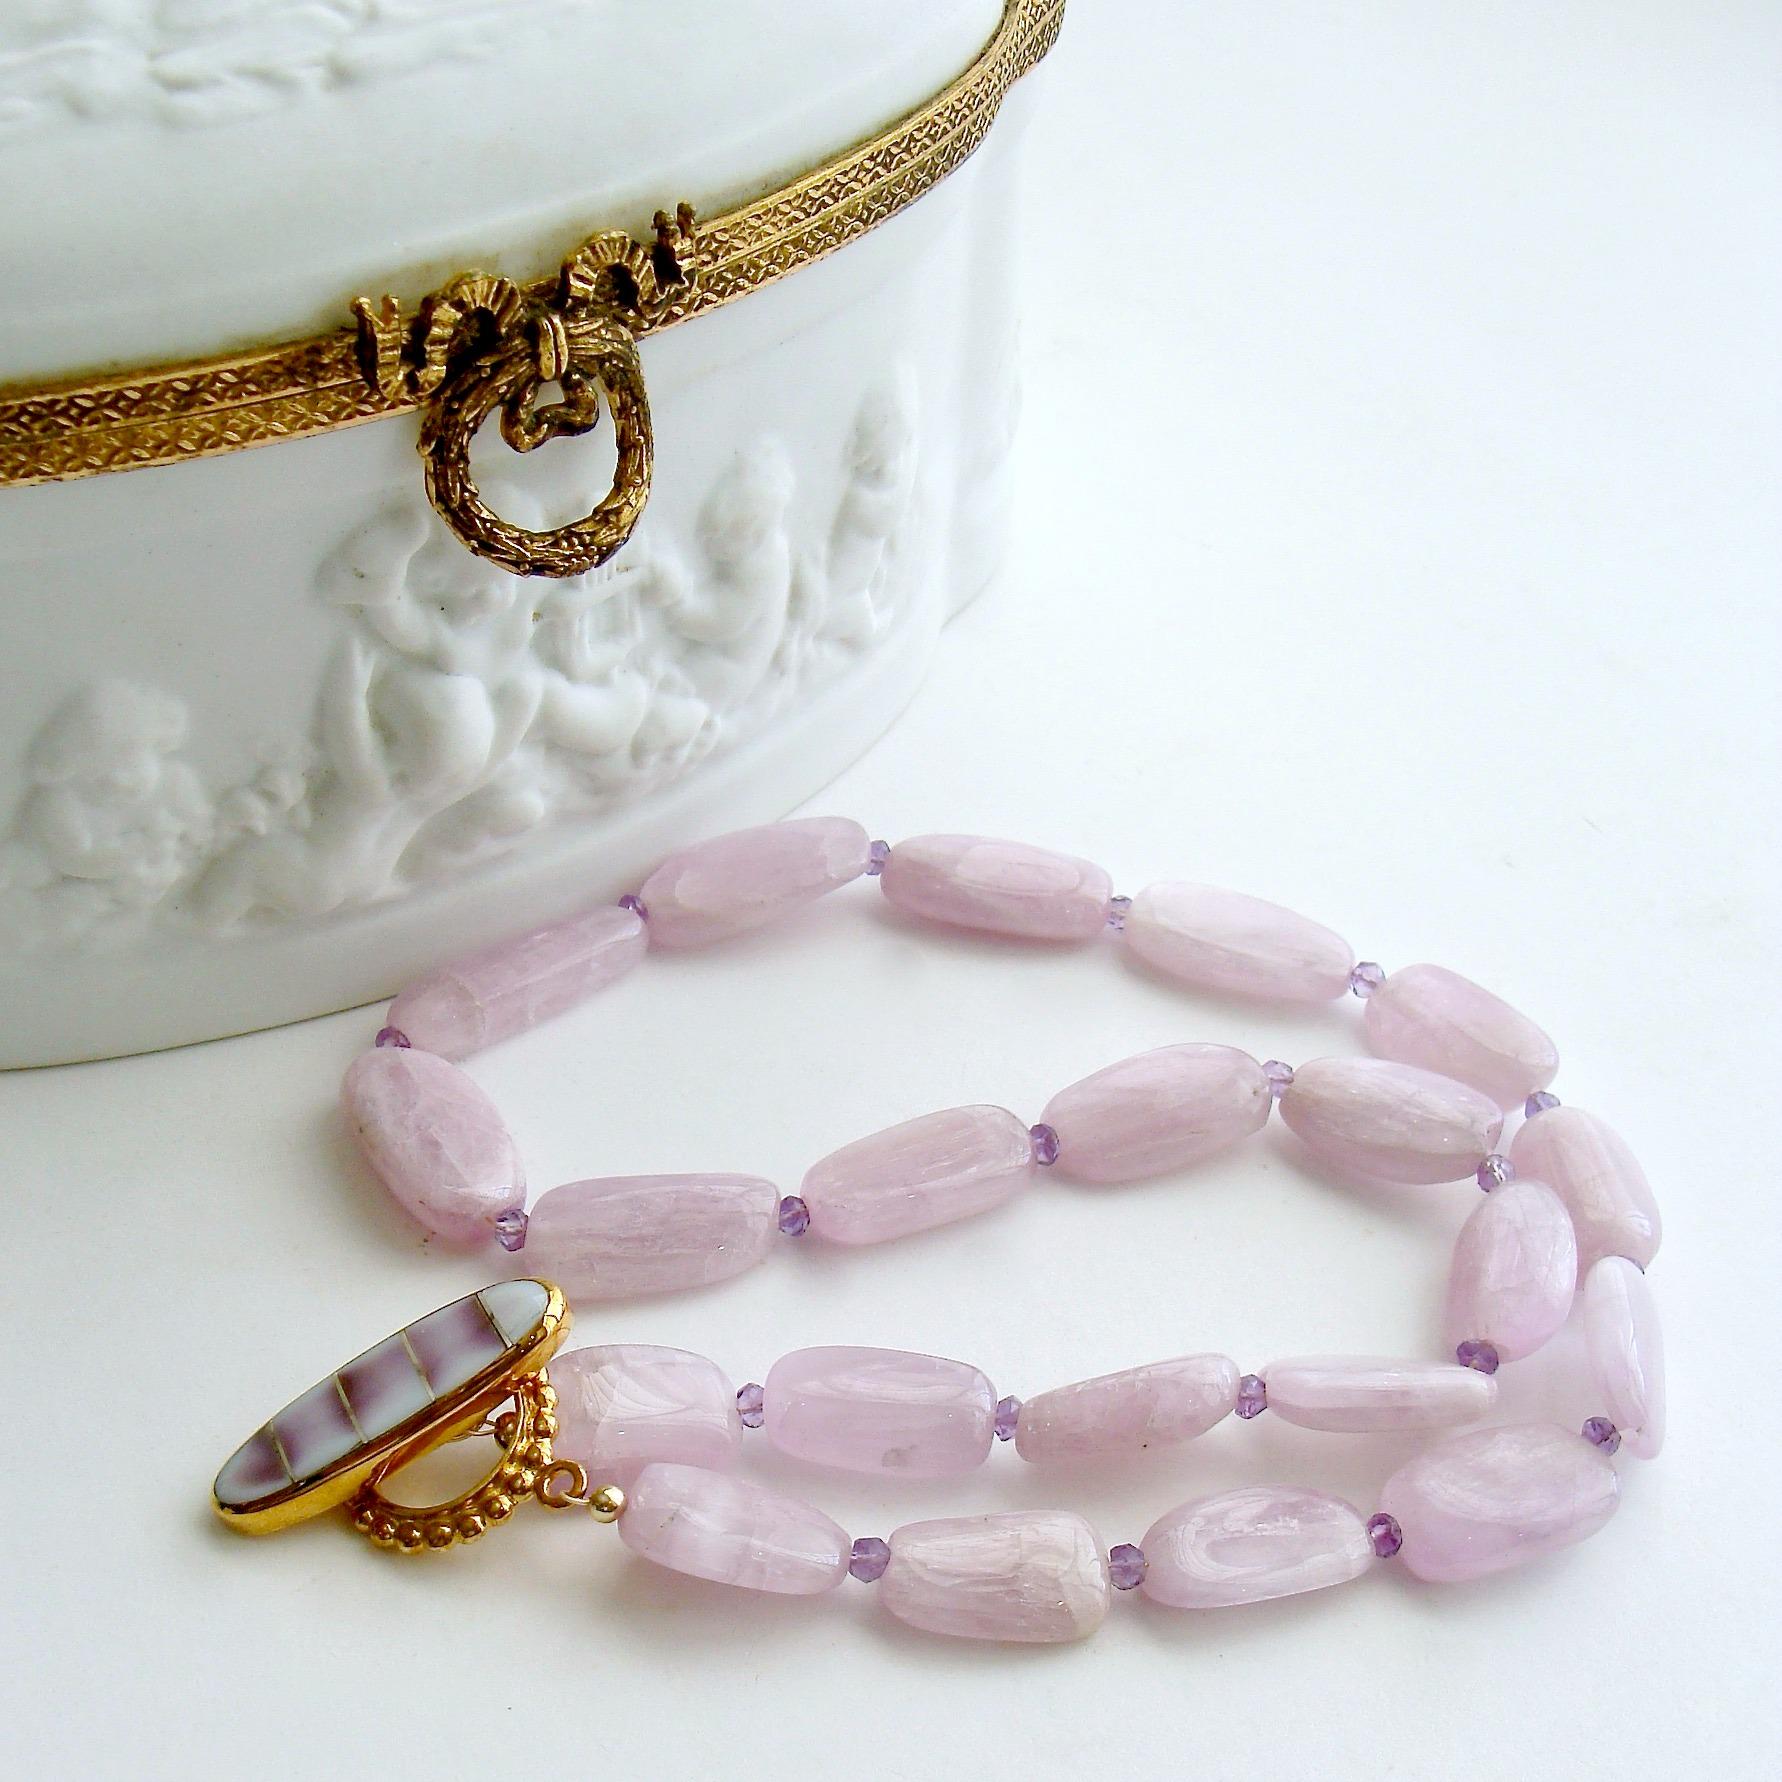 Orianne V Necklace

A stunning suite of smooth flat kunzite nuggets in a sweet orchid confectionery color, create a modern and feminine choker necklace.  The untamed nature of these gorgeous confectionery colored stones is a sophisticated